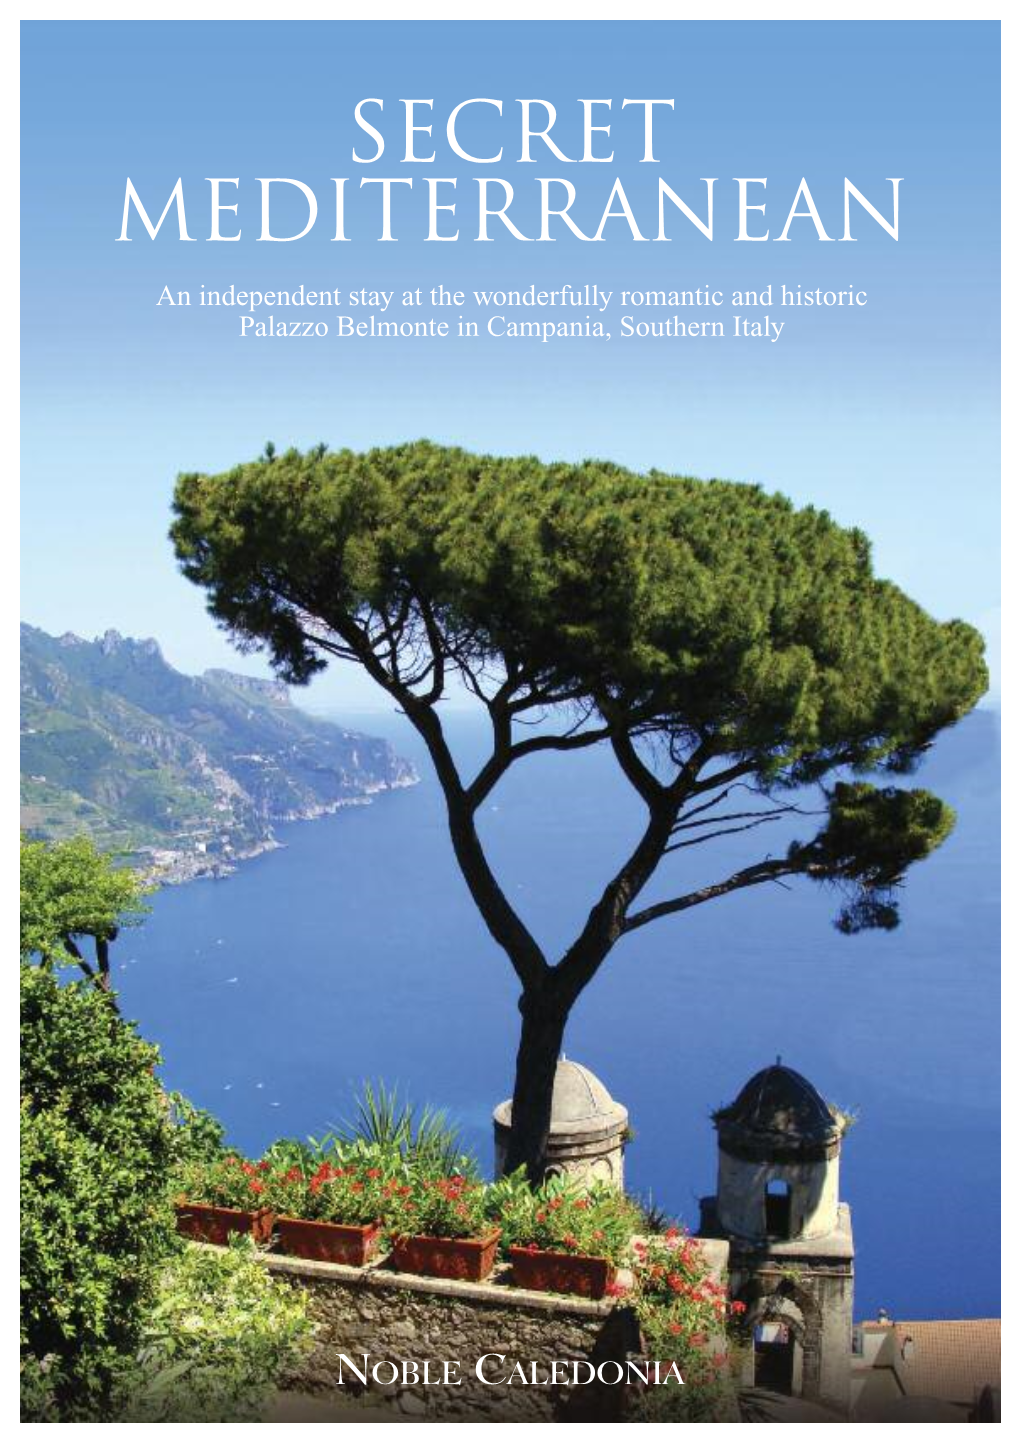 SECRET MEDITERRANEAN an Independent Stay at the Wonderfully Romantic and Historic Palazzo Belmonte in Campania, Southern Italy